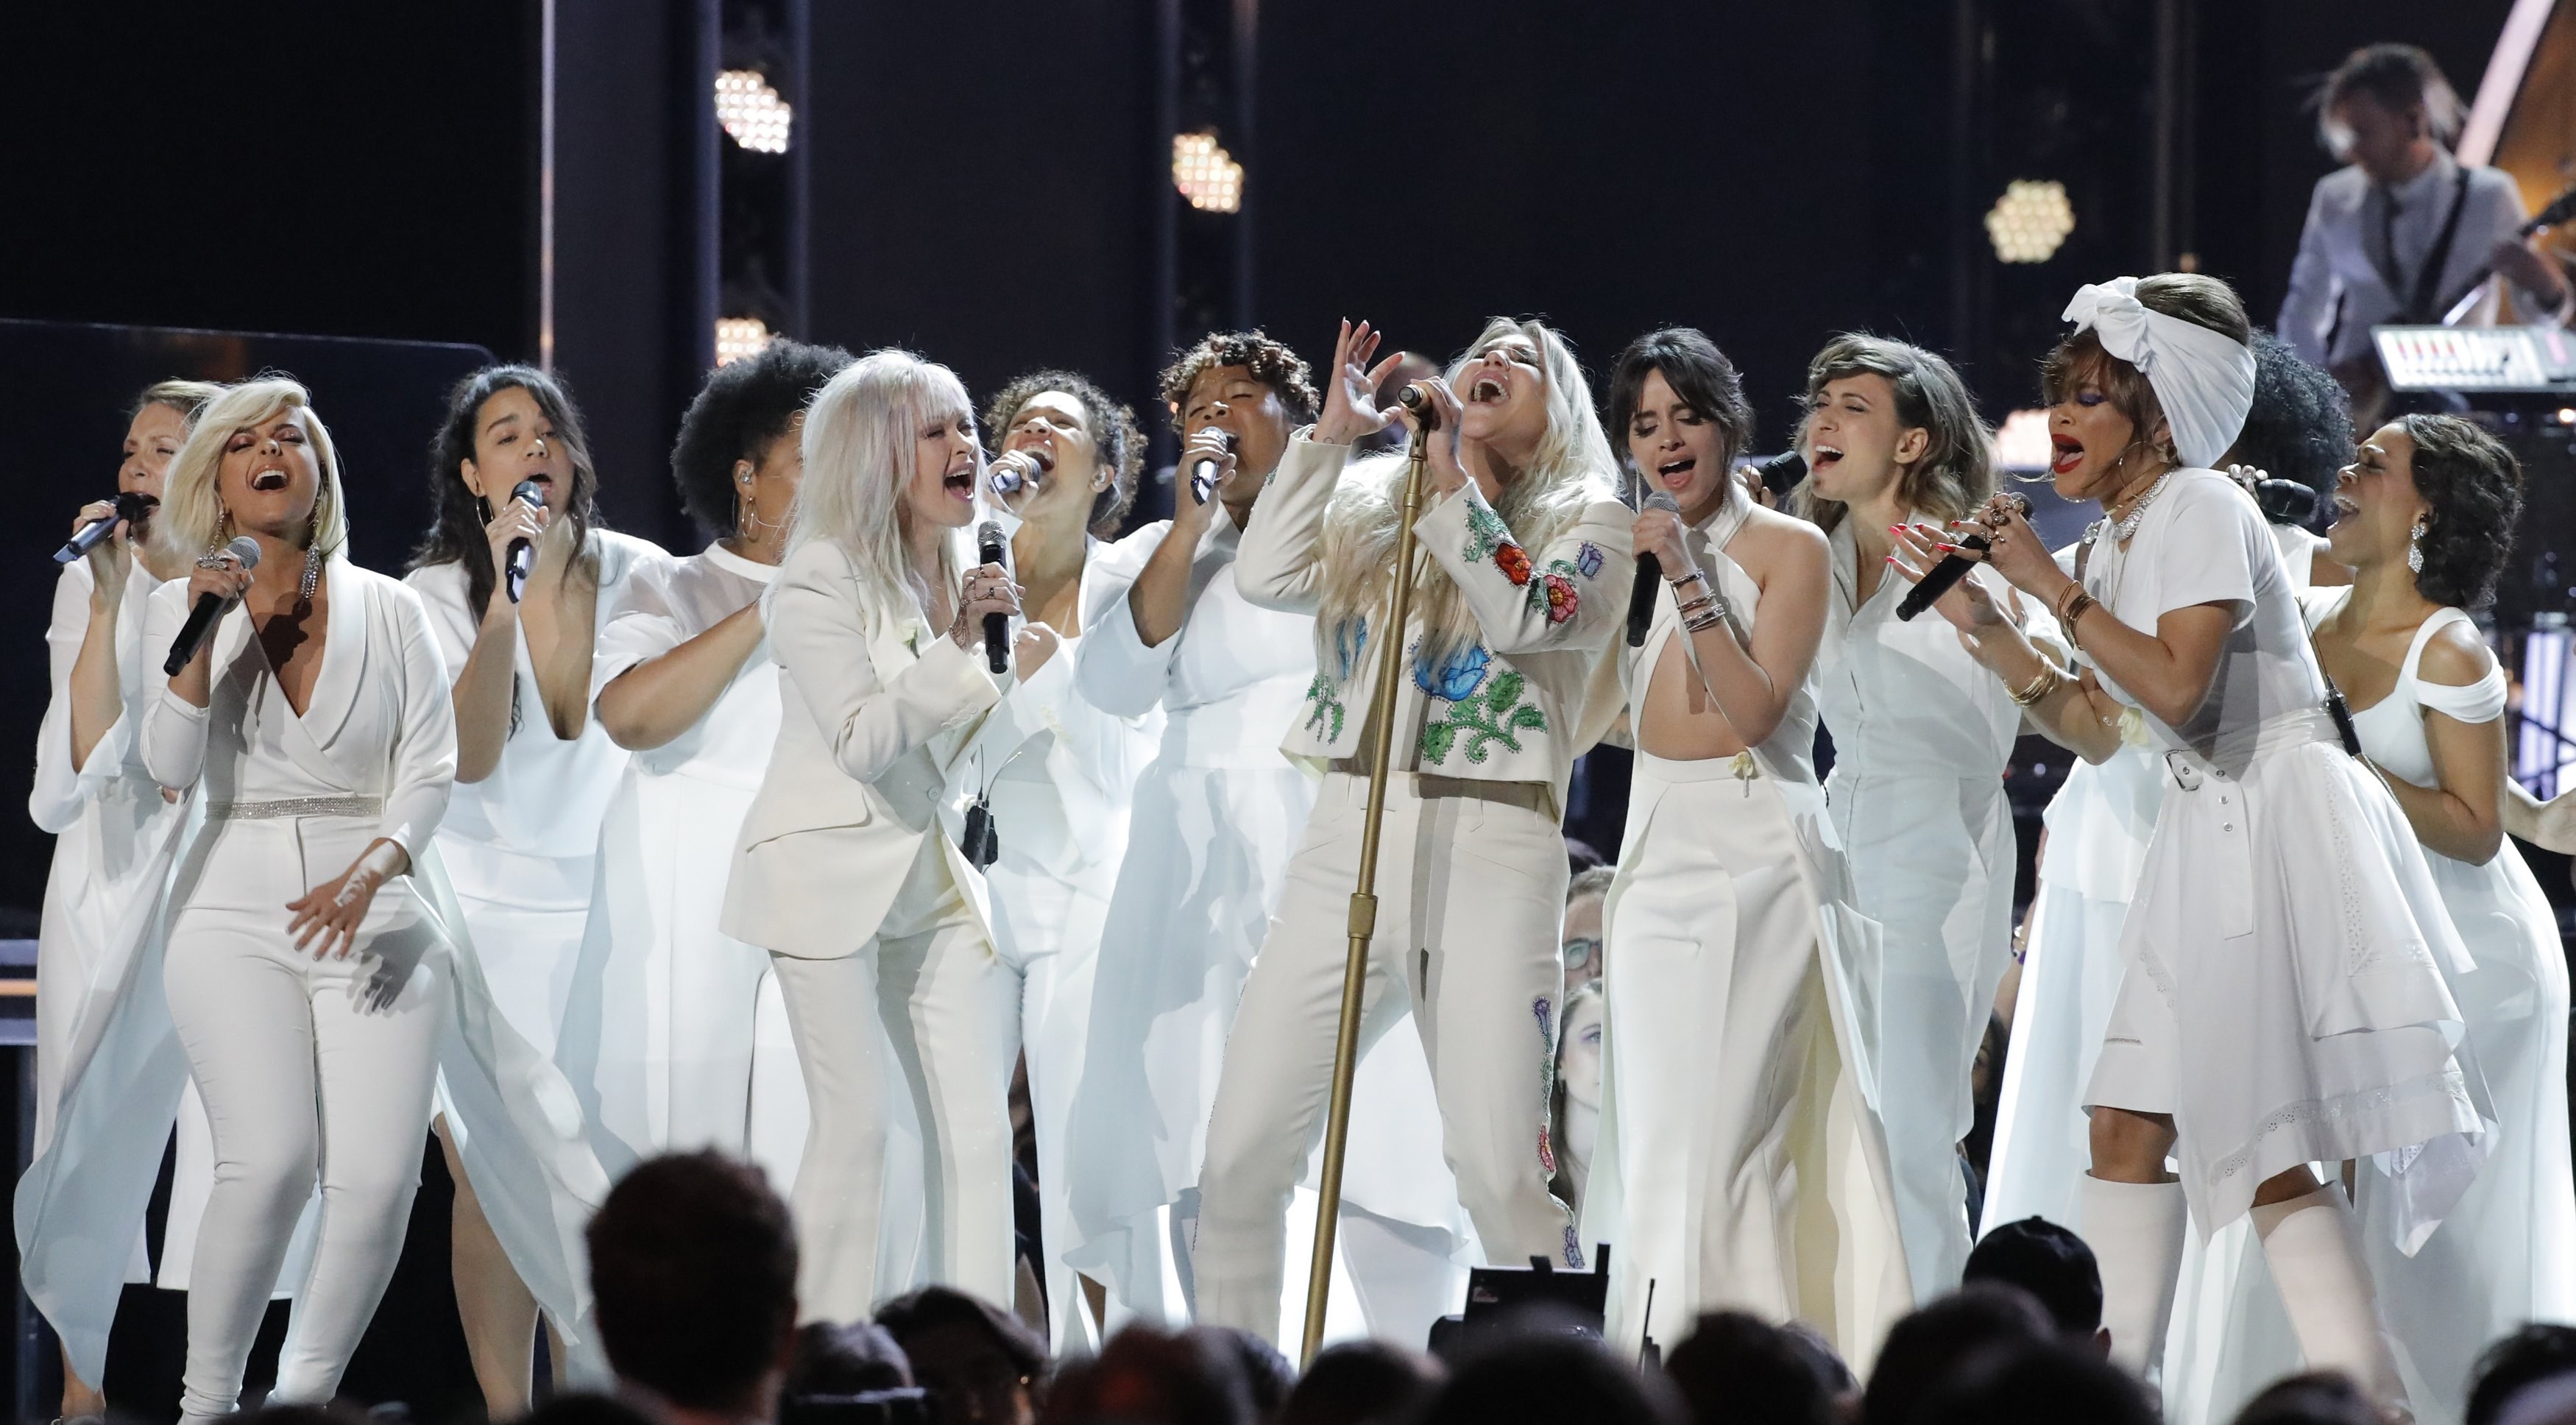 Kesha (centre), who levelled accusations of sexual assault against producer Dr Luke, is joined by a multitude of singers as they perform Praying at the Grammy Awards. Photo: Reuters/Lucas Jackson